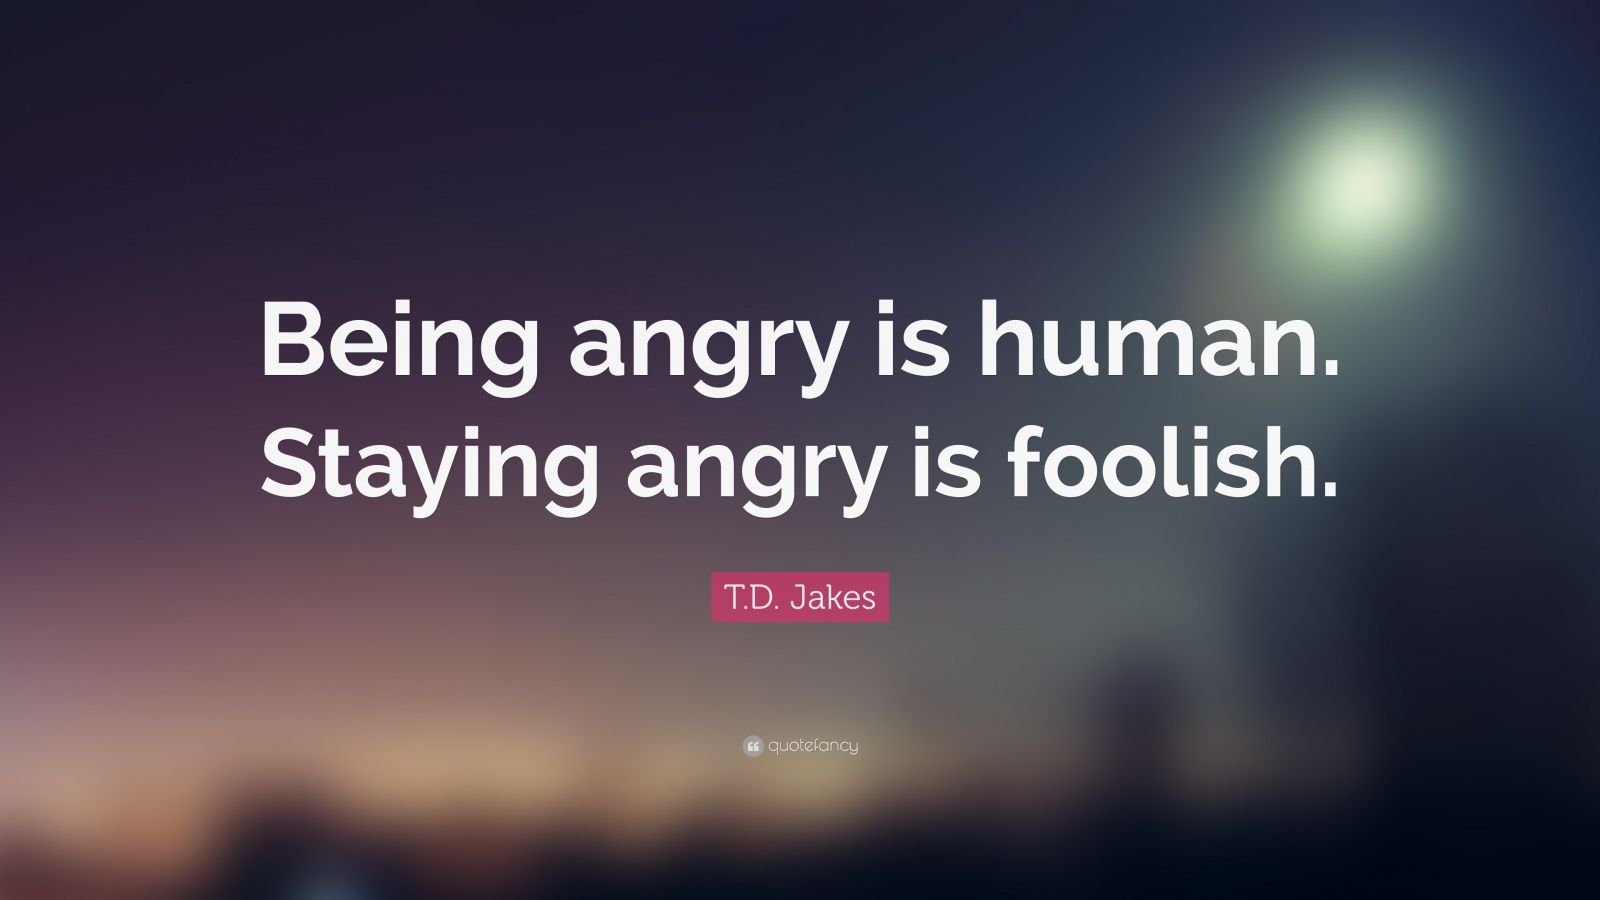 T.D. Jakes Quote: “Being angry is human. Staying angry is foolish.” (20